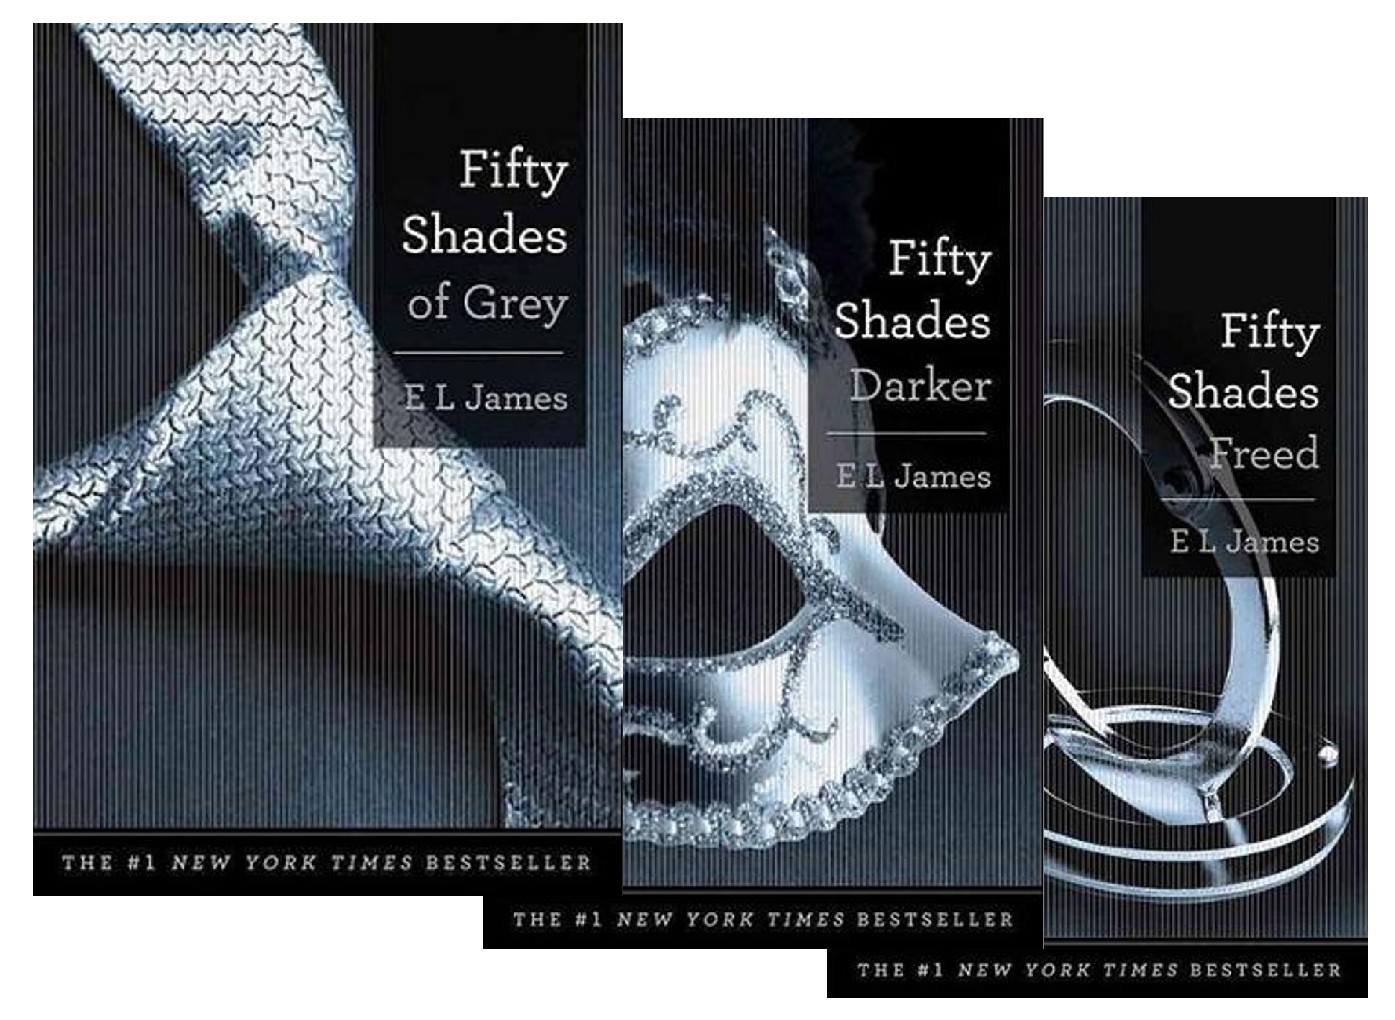 book review 50 shades of grey